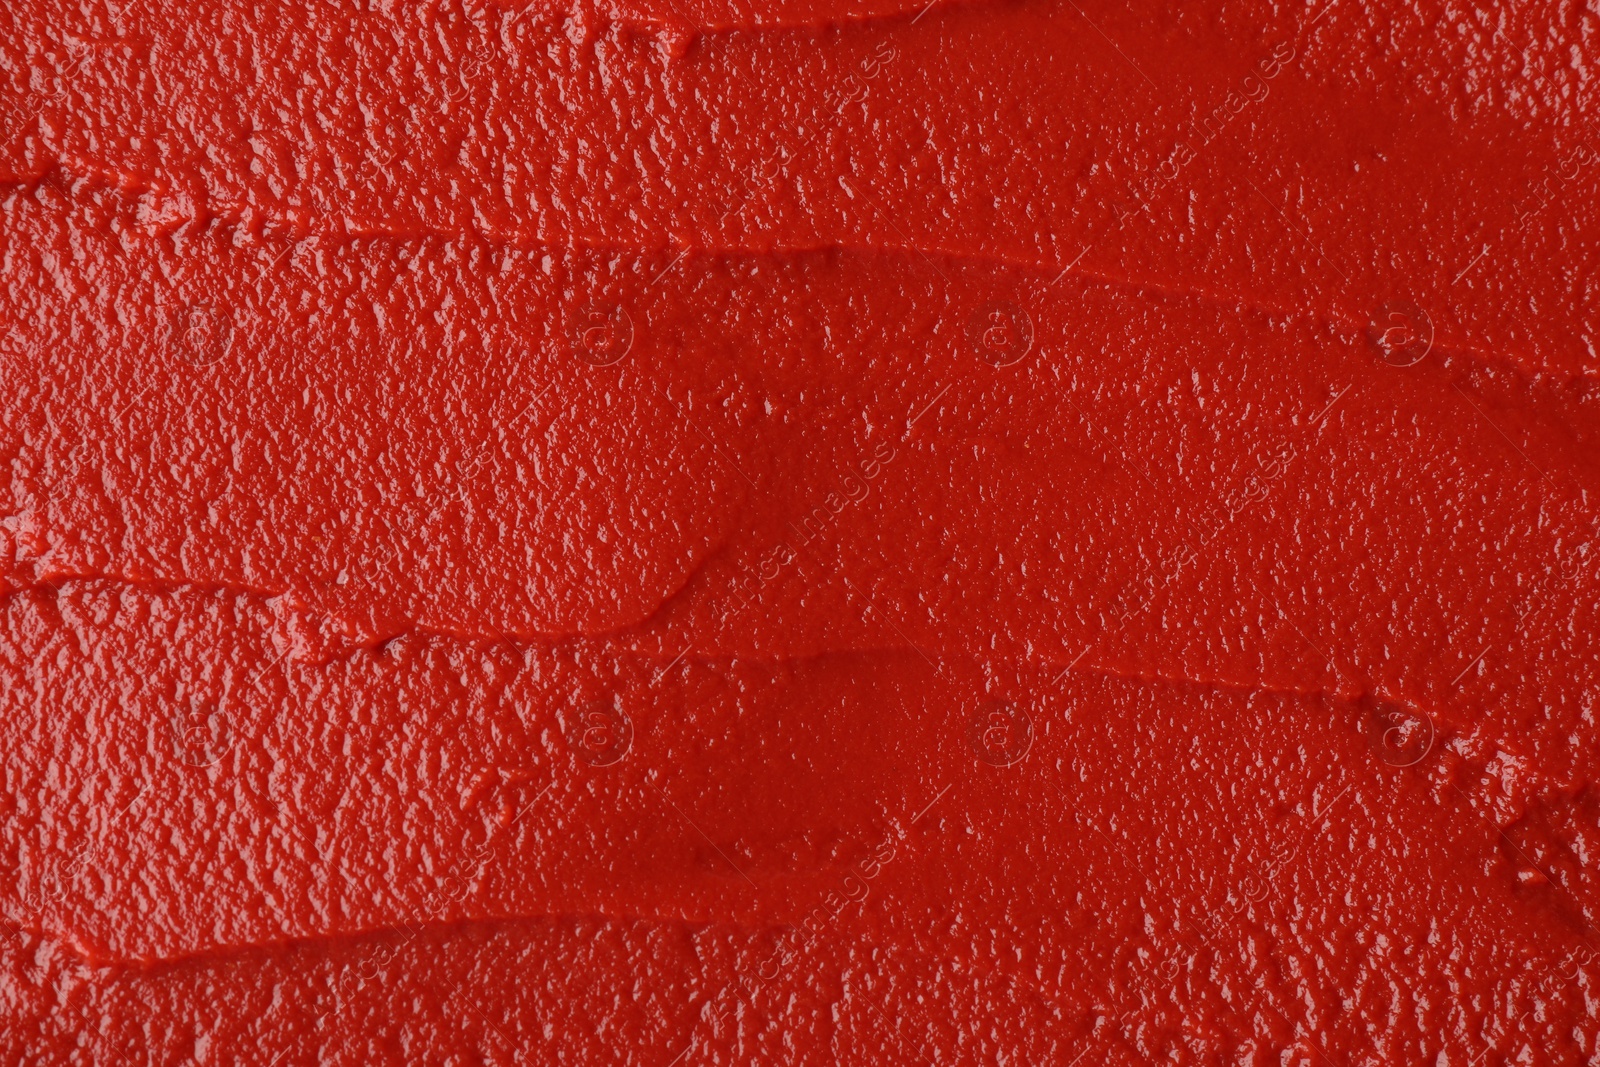 Photo of Texture of ketchup as background, top view. Tomato sauce